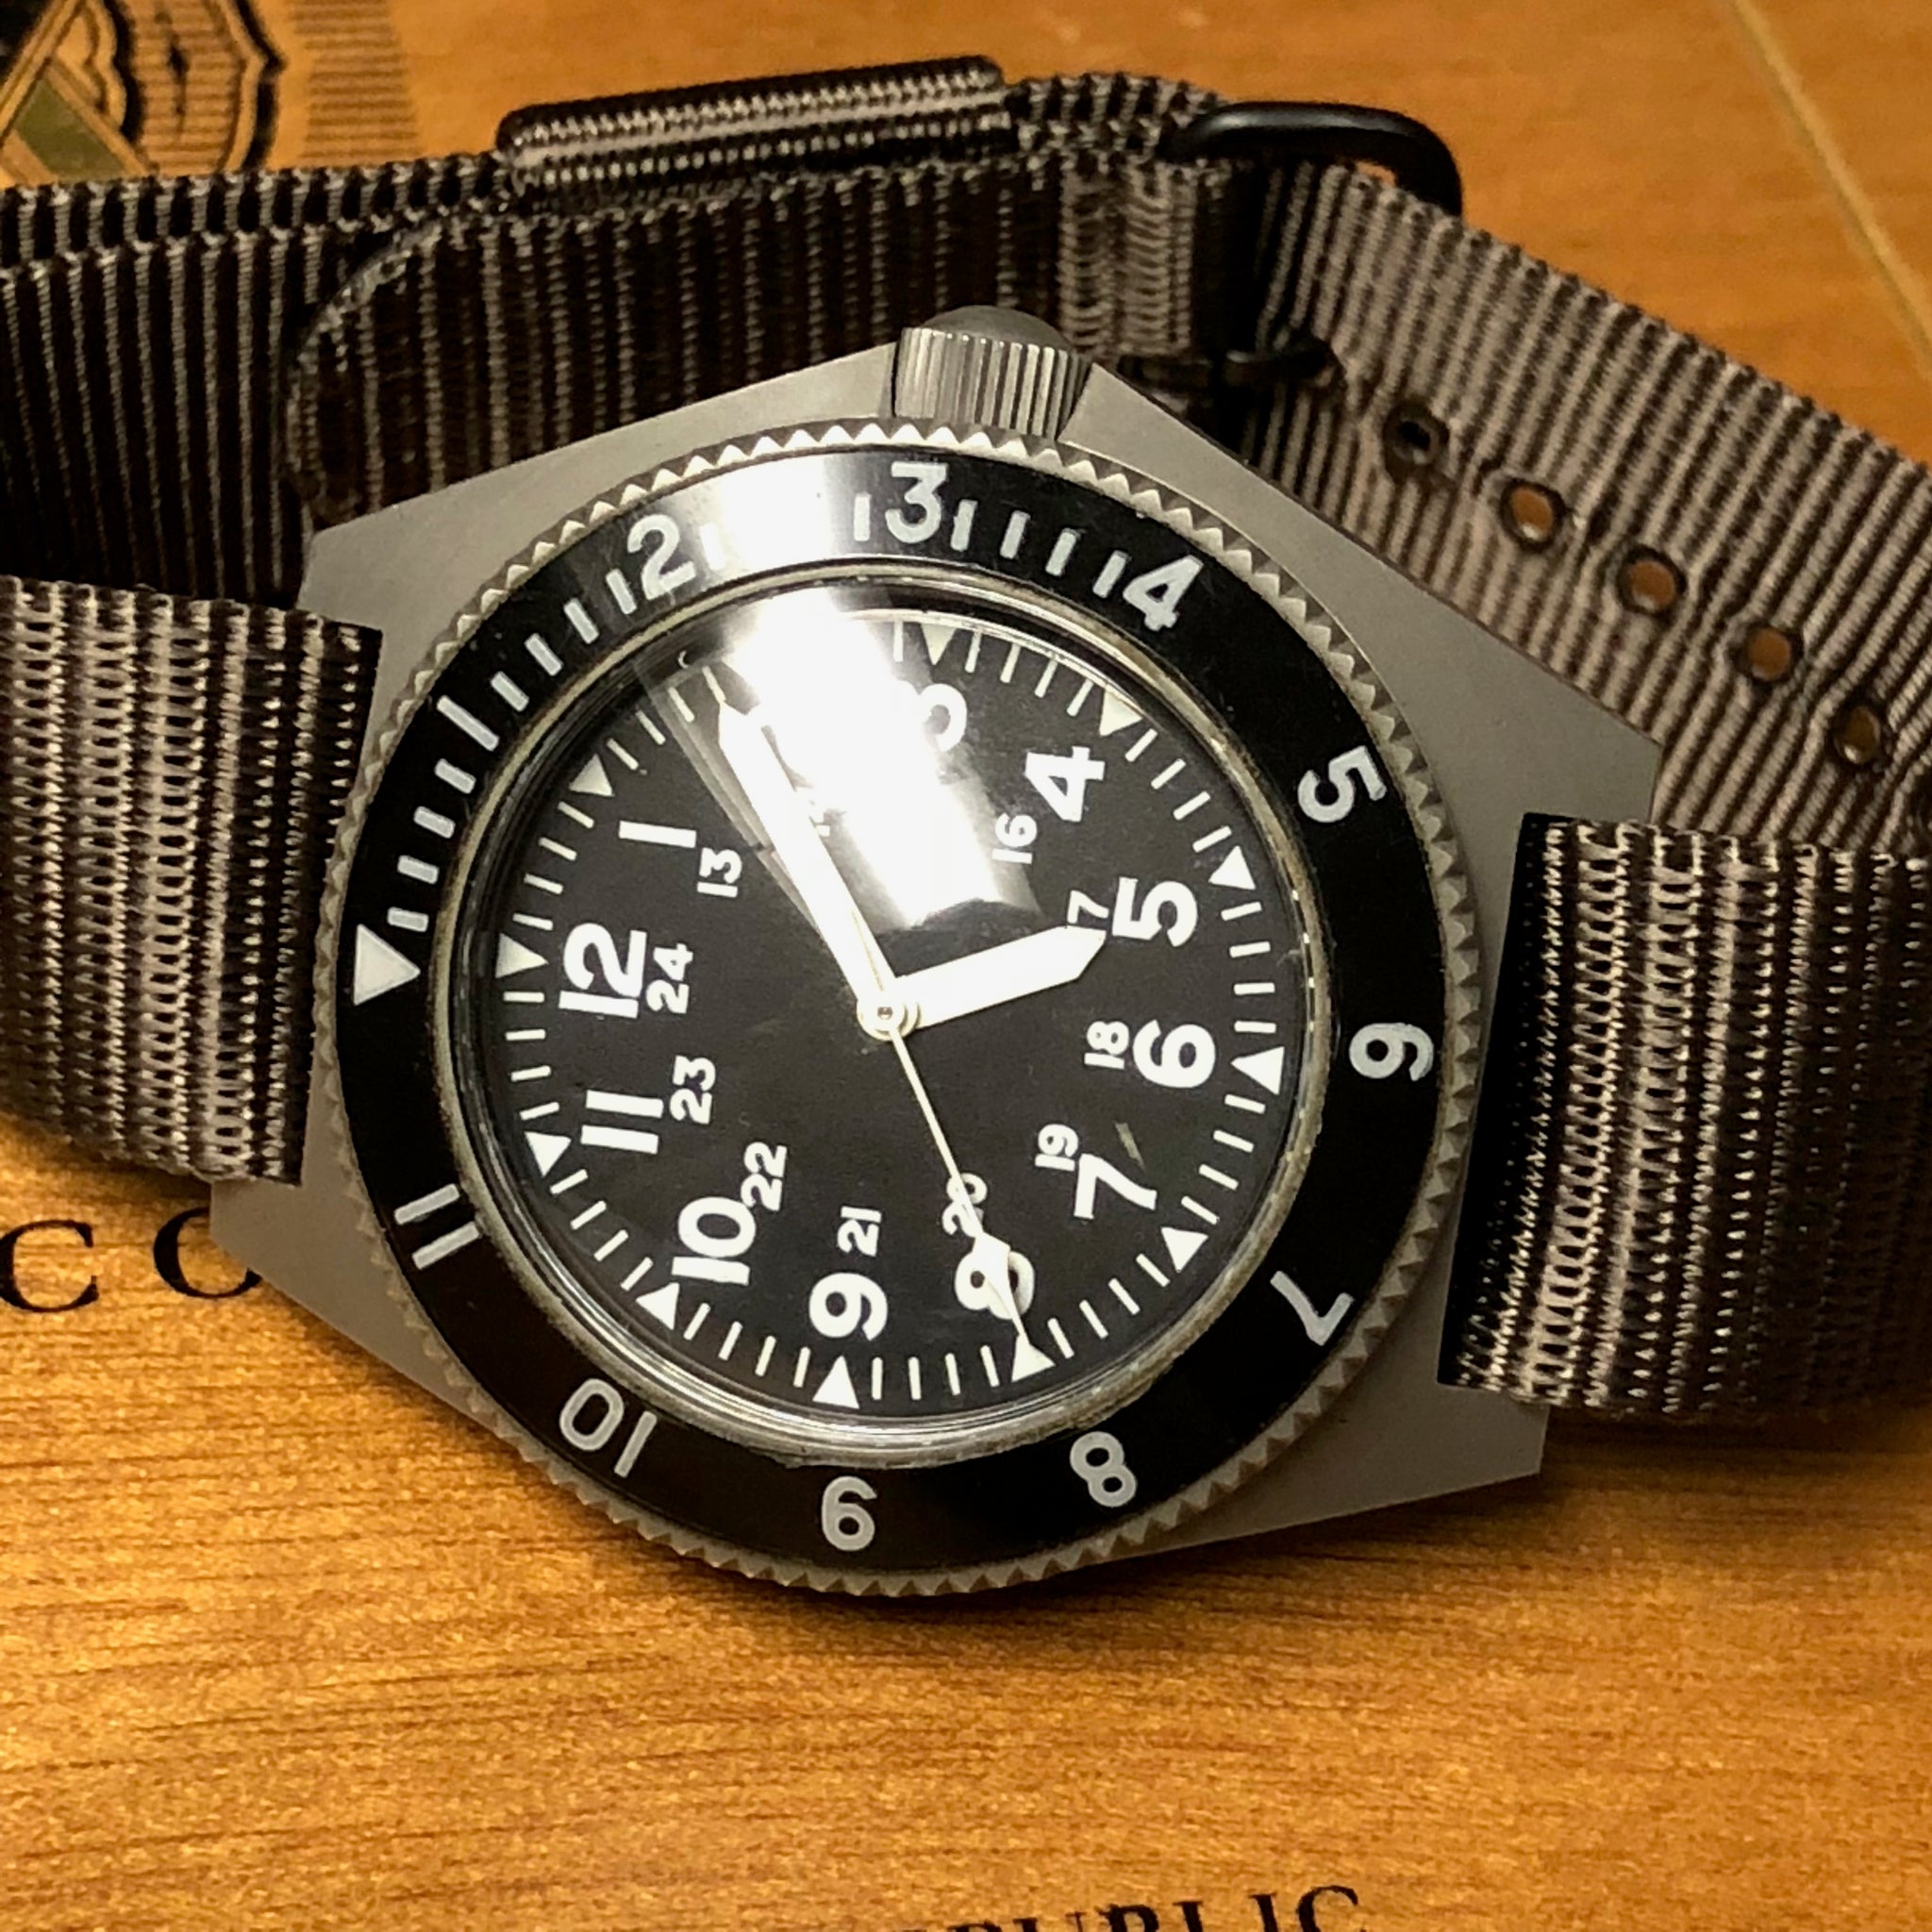 Sold - Benrus Type II Class B MIL-W-50717 Military Dive Watch With